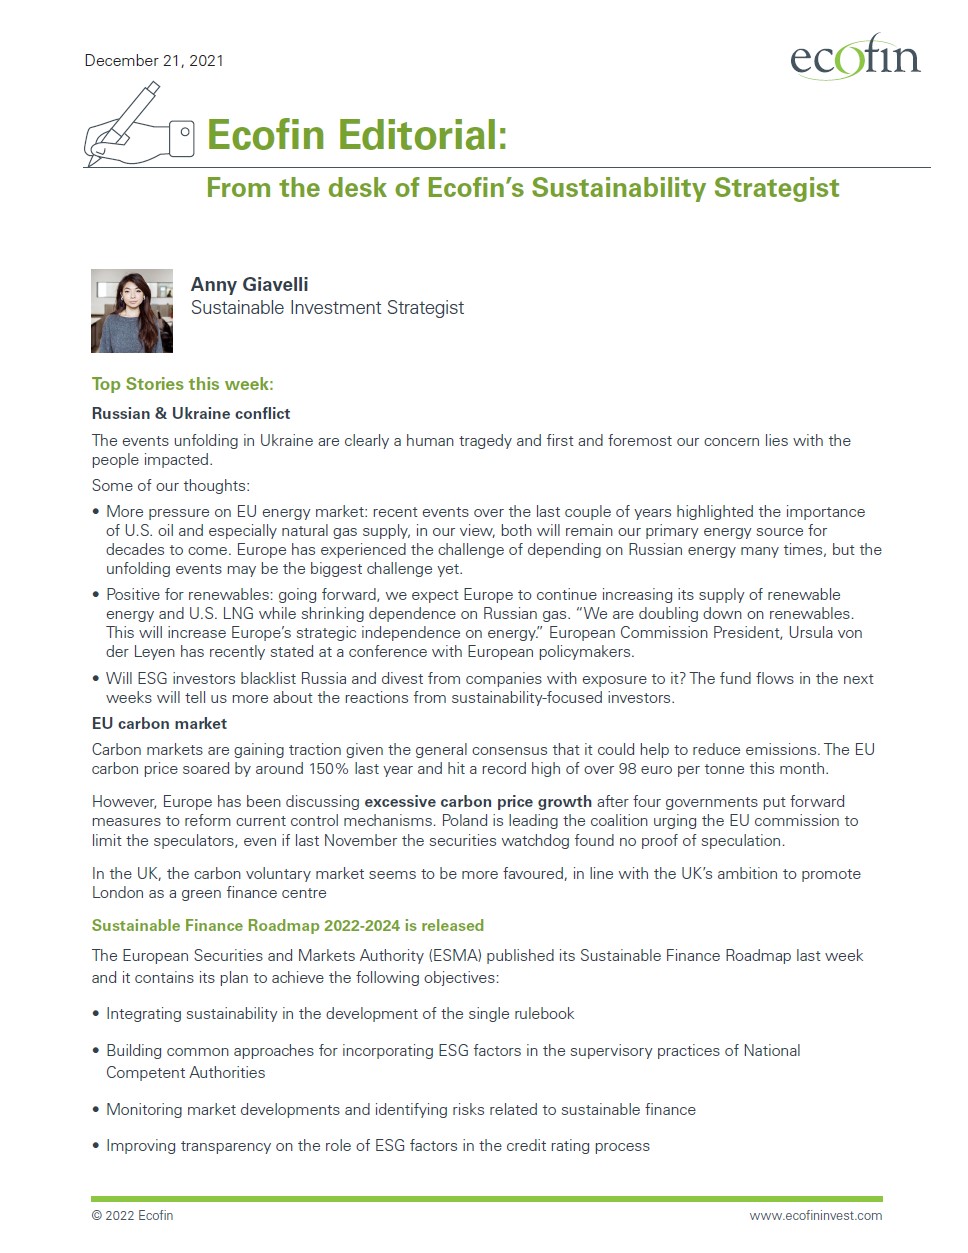 Ecofin Editorial: From the desk of Ecofin’s Sustainability Strategist